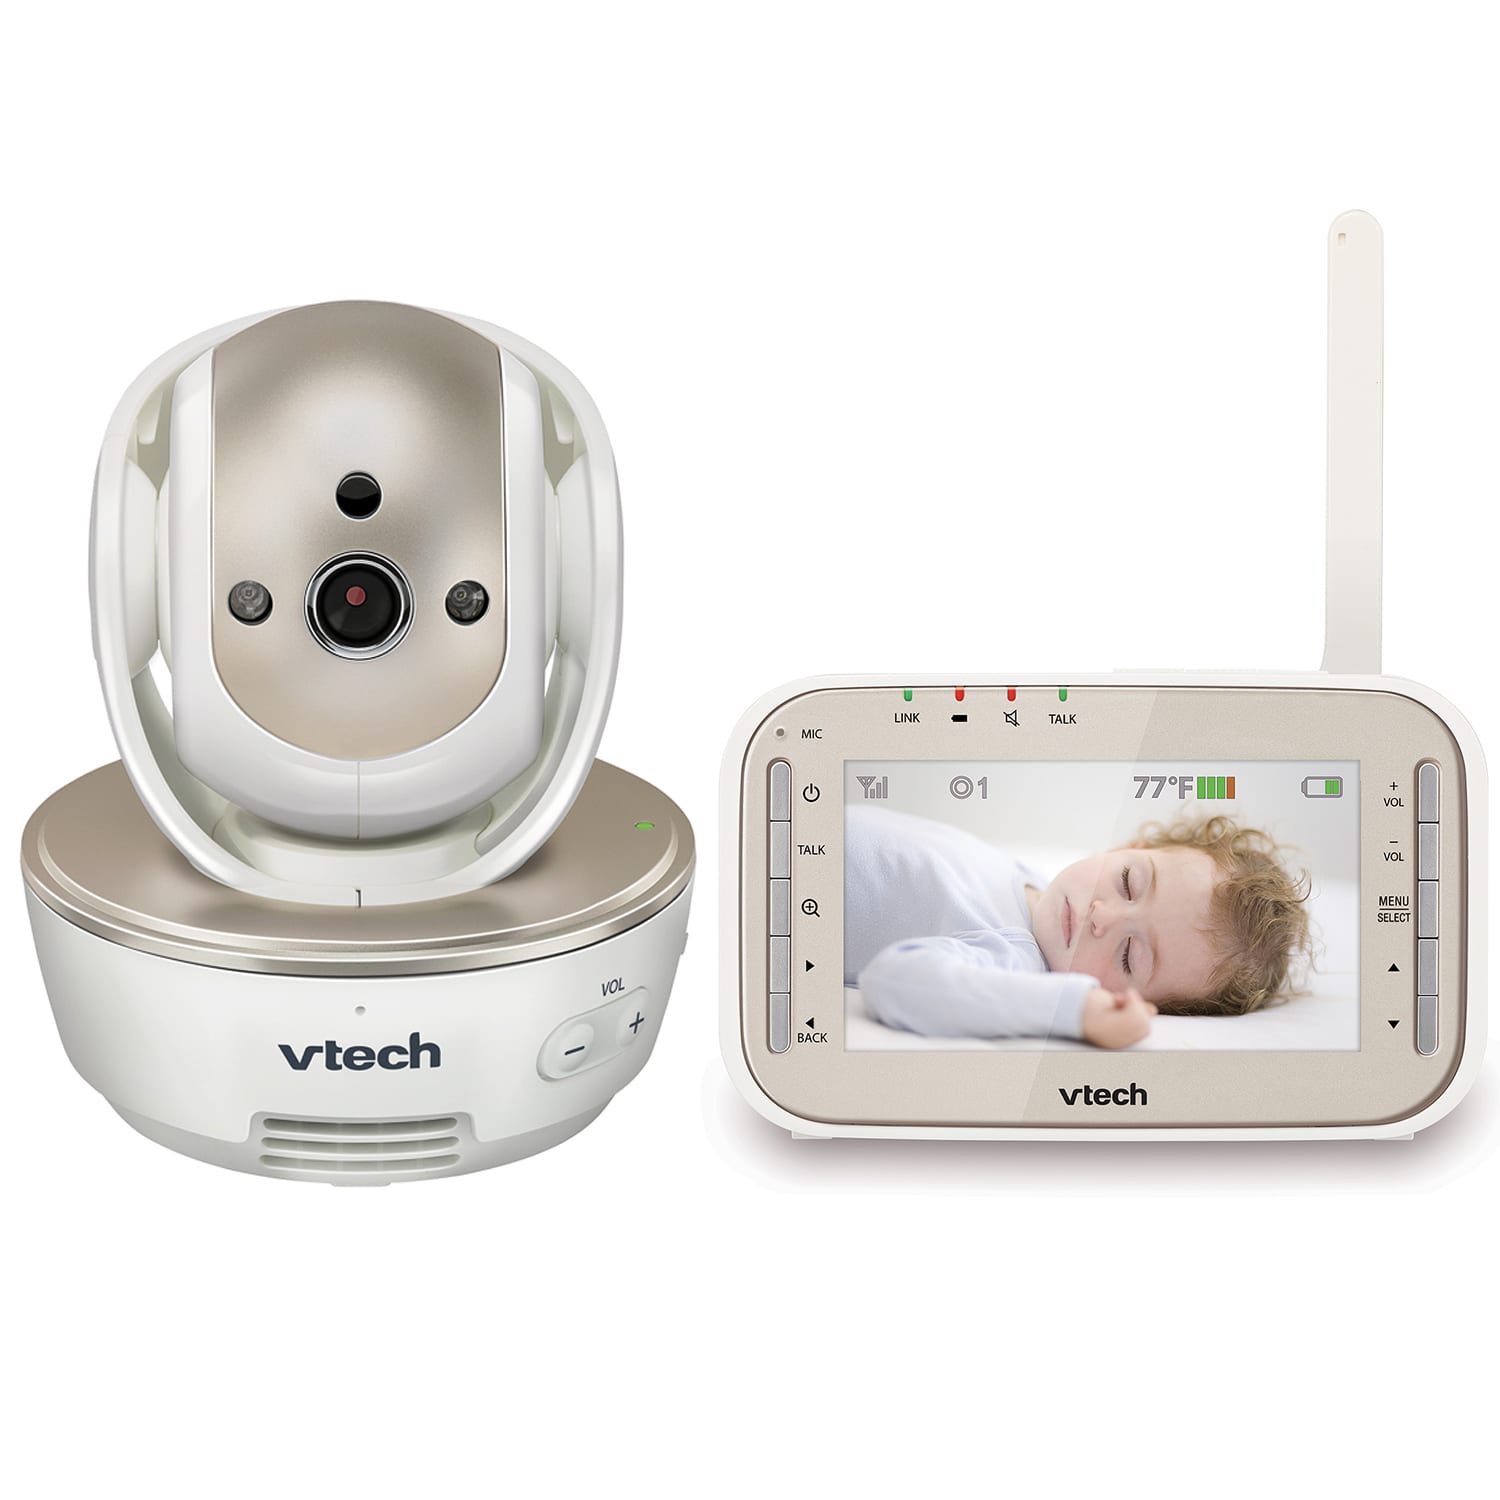 VTech VM343 REPLACEMENT Parent Video Handheld Baby CAMERA 3 DAYS SALE!! 